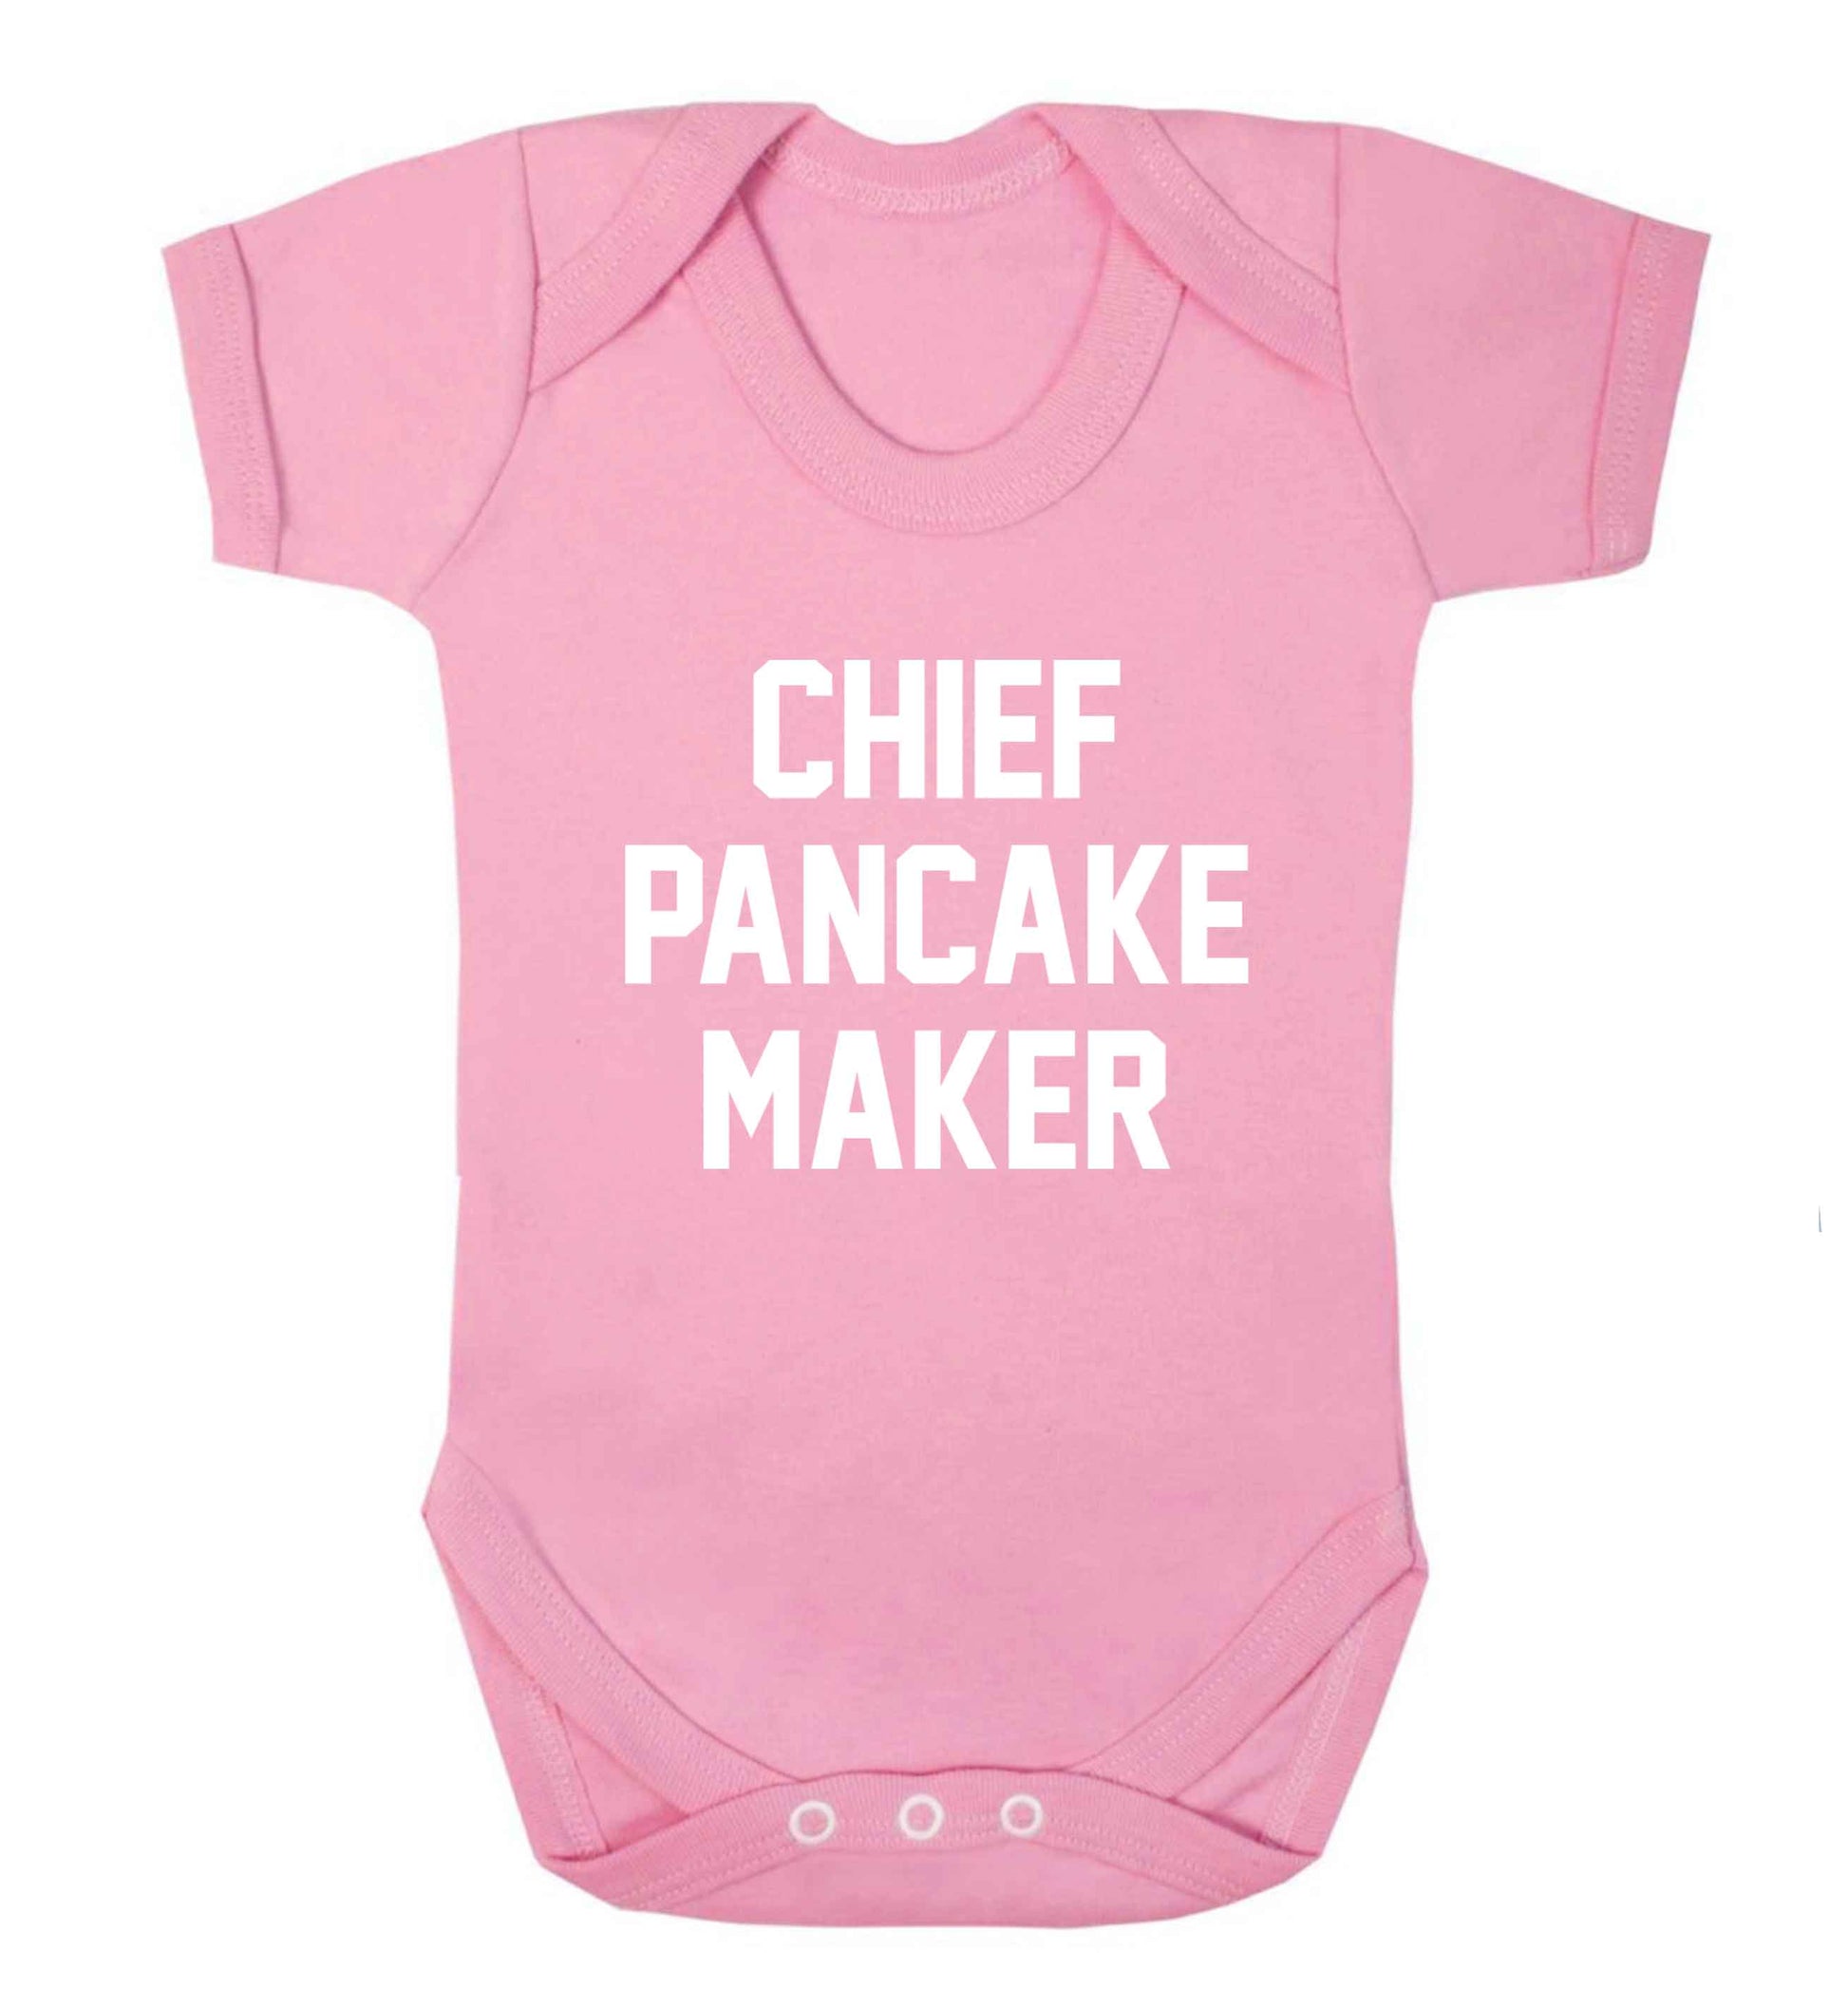 Chief pancake maker baby vest pale pink 18-24 months